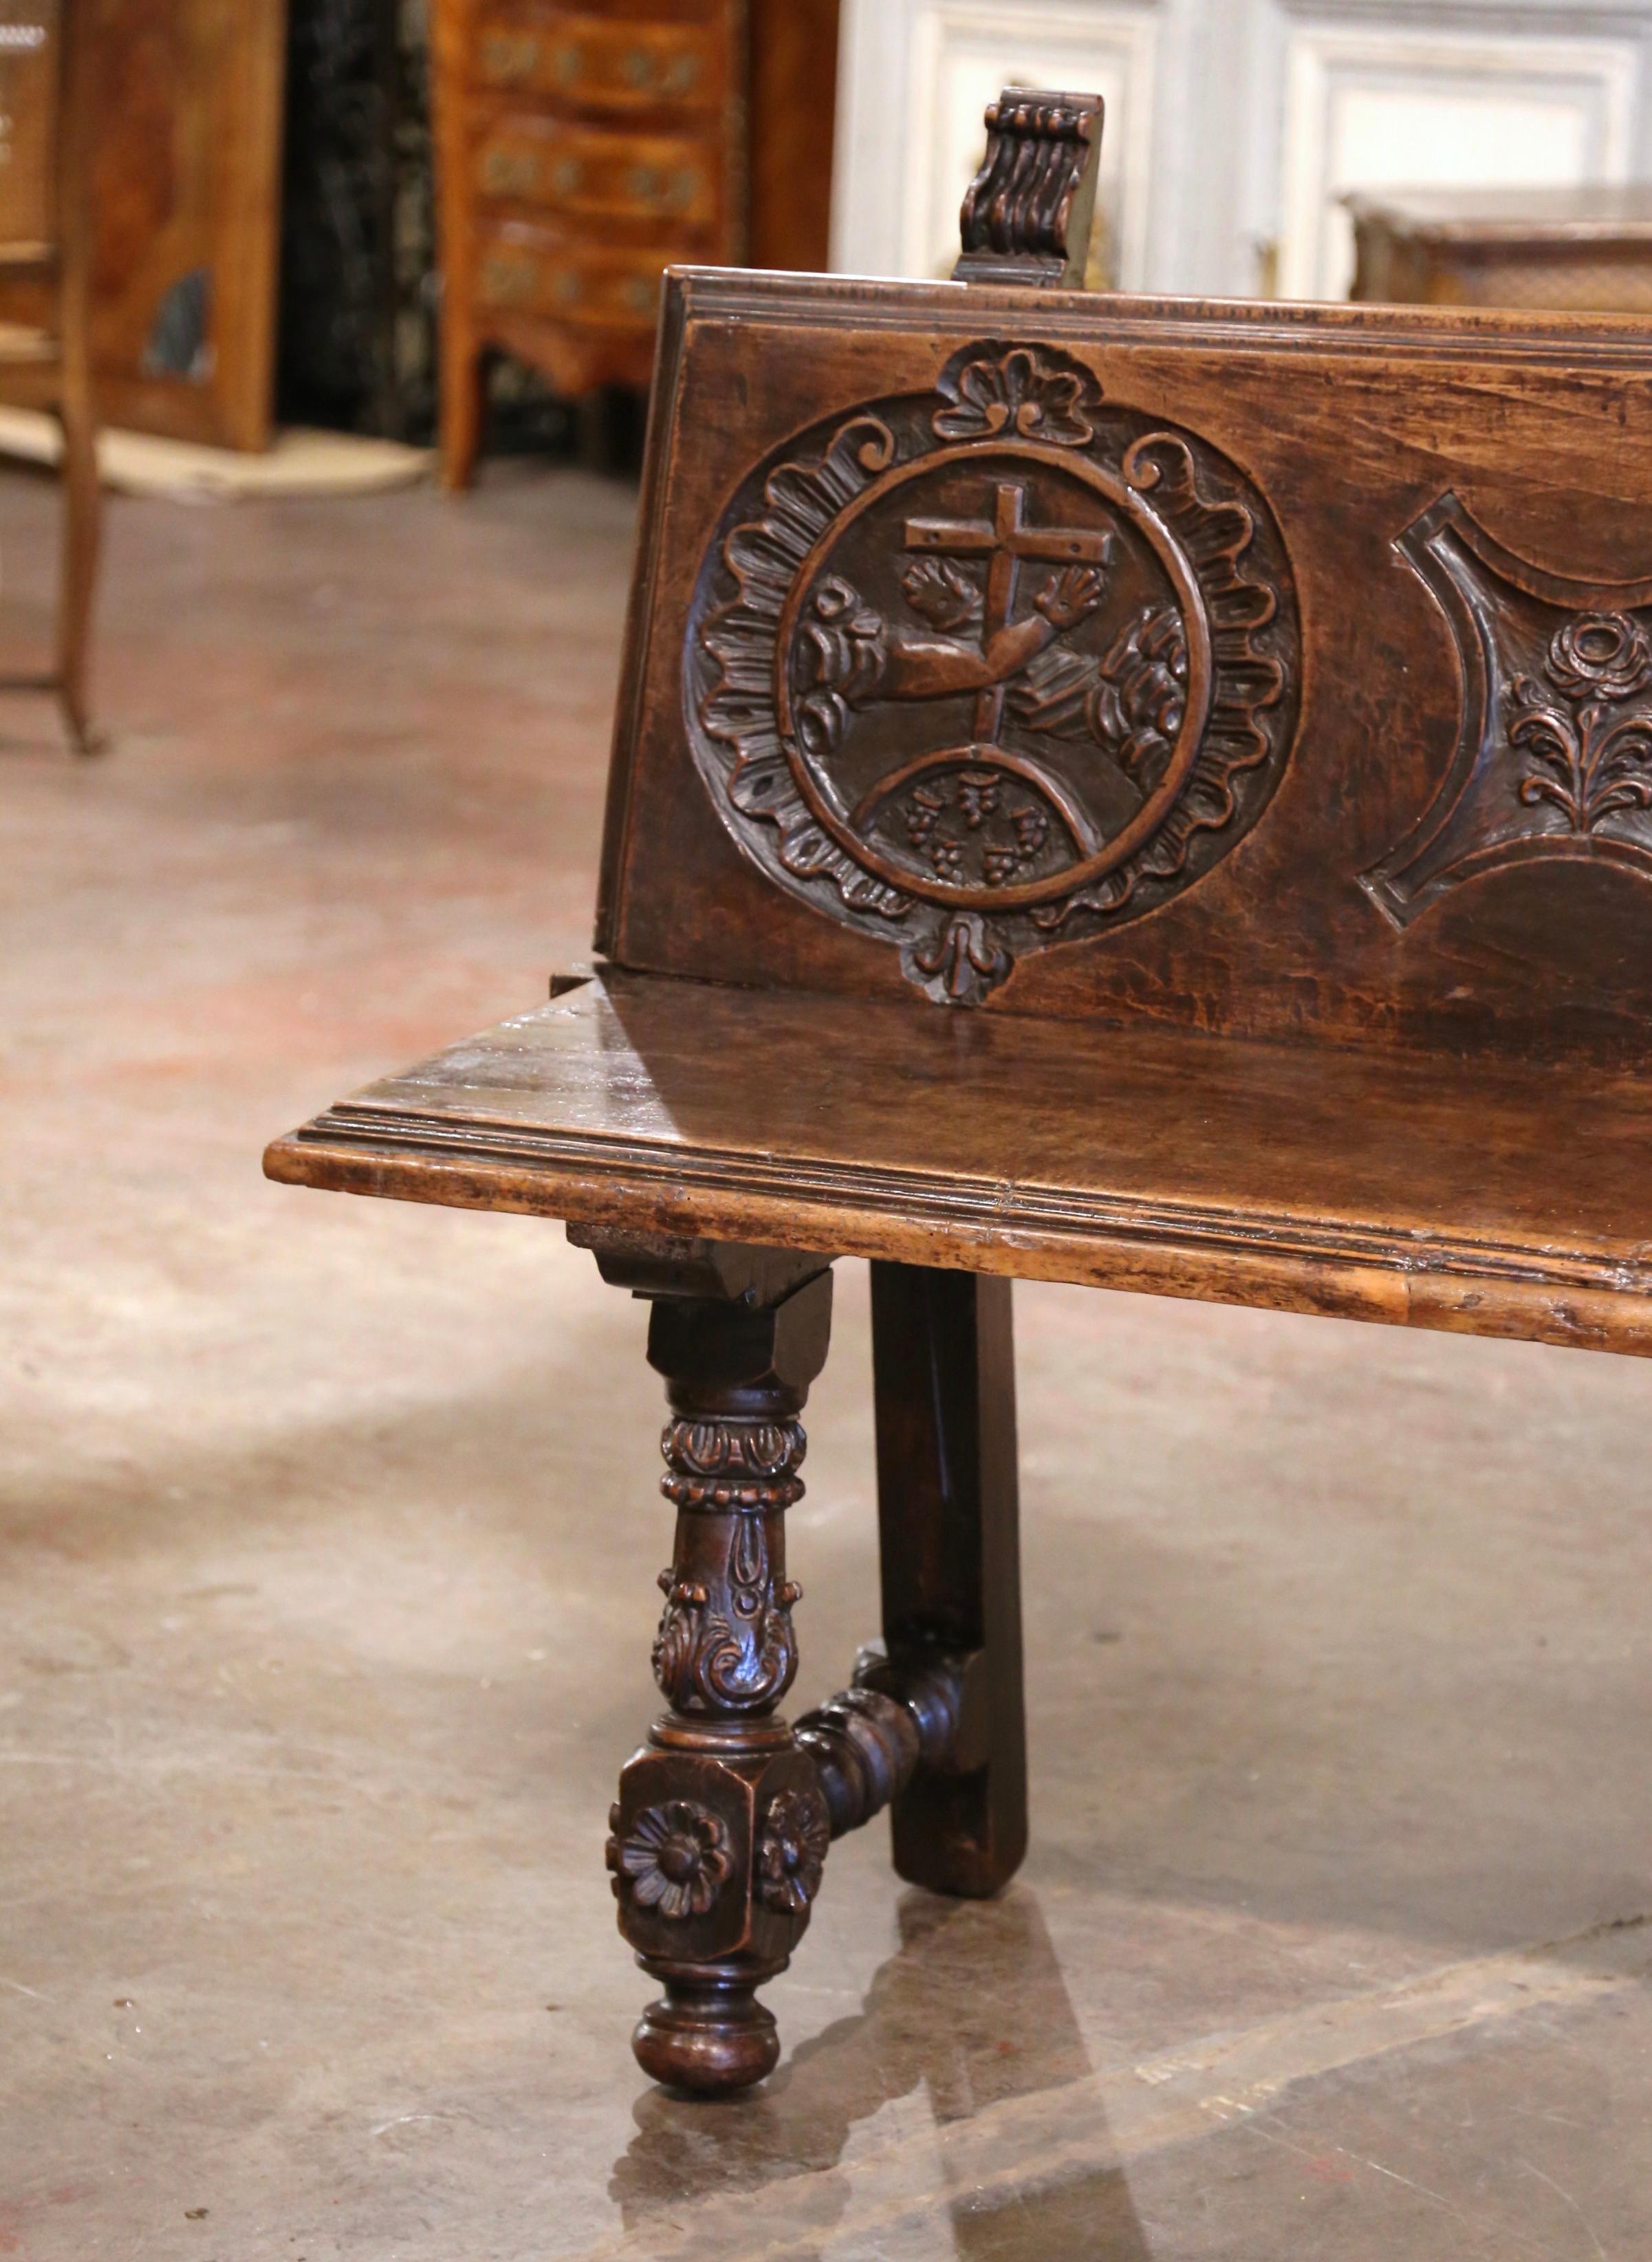 Hand-Carved 18th Century Spanish Baroque Carved Walnut Bench from The Pyrenees